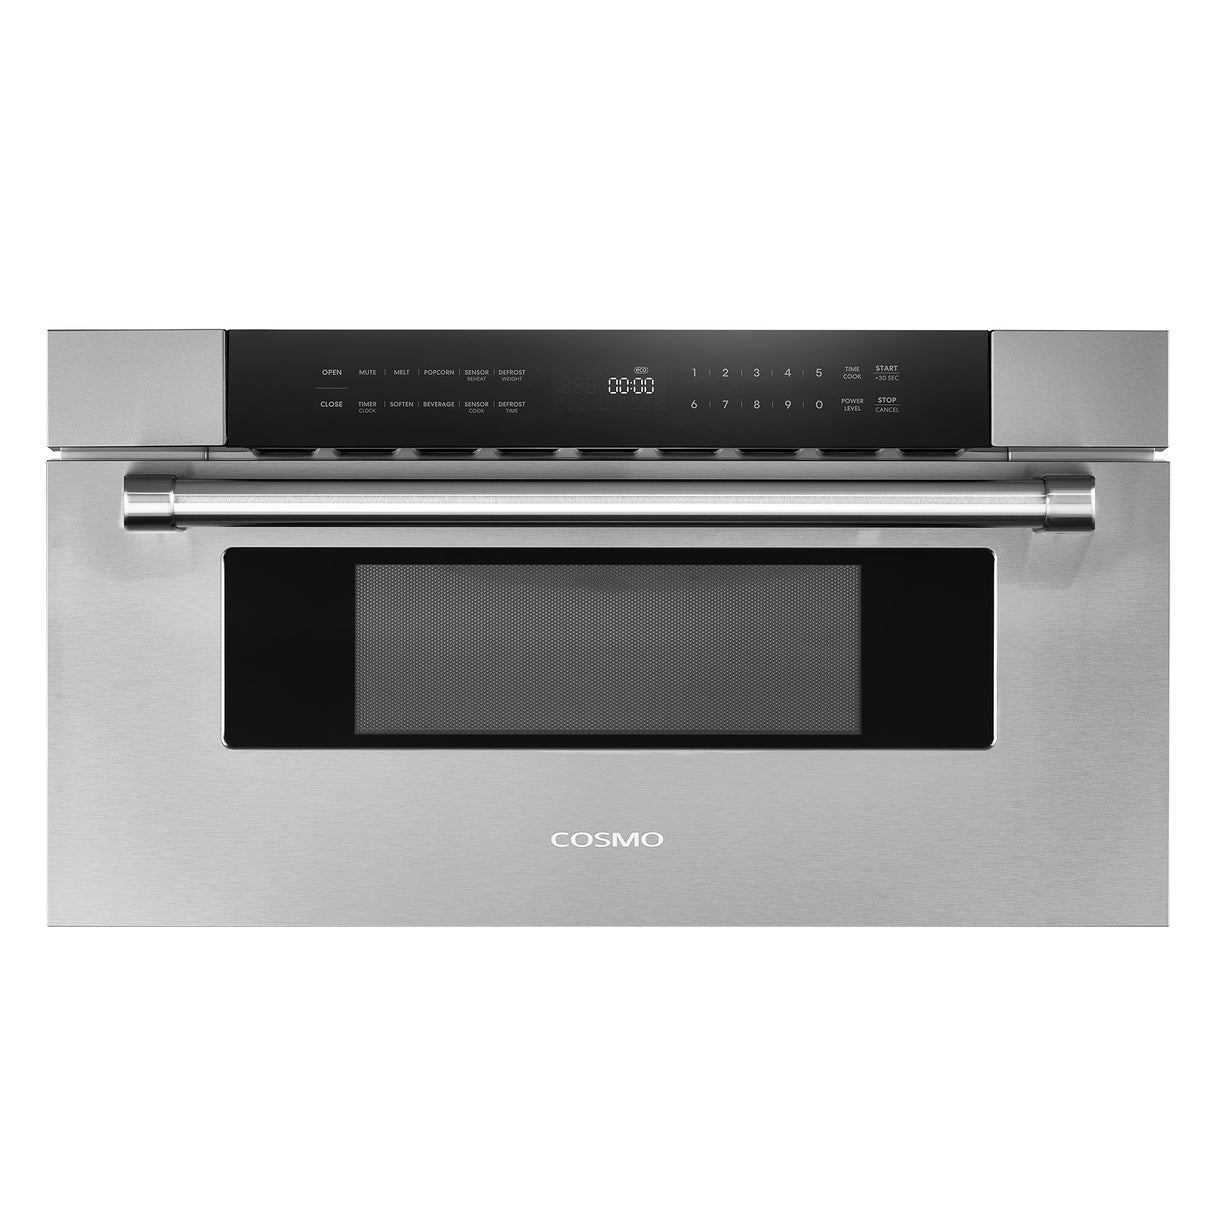 Cosmo 30" Built-in Microwave Drawer with Automatic Presets, Touch Controls, Defrosting Rack and 1.2 cu. ft. Capacity in Stainless Steel